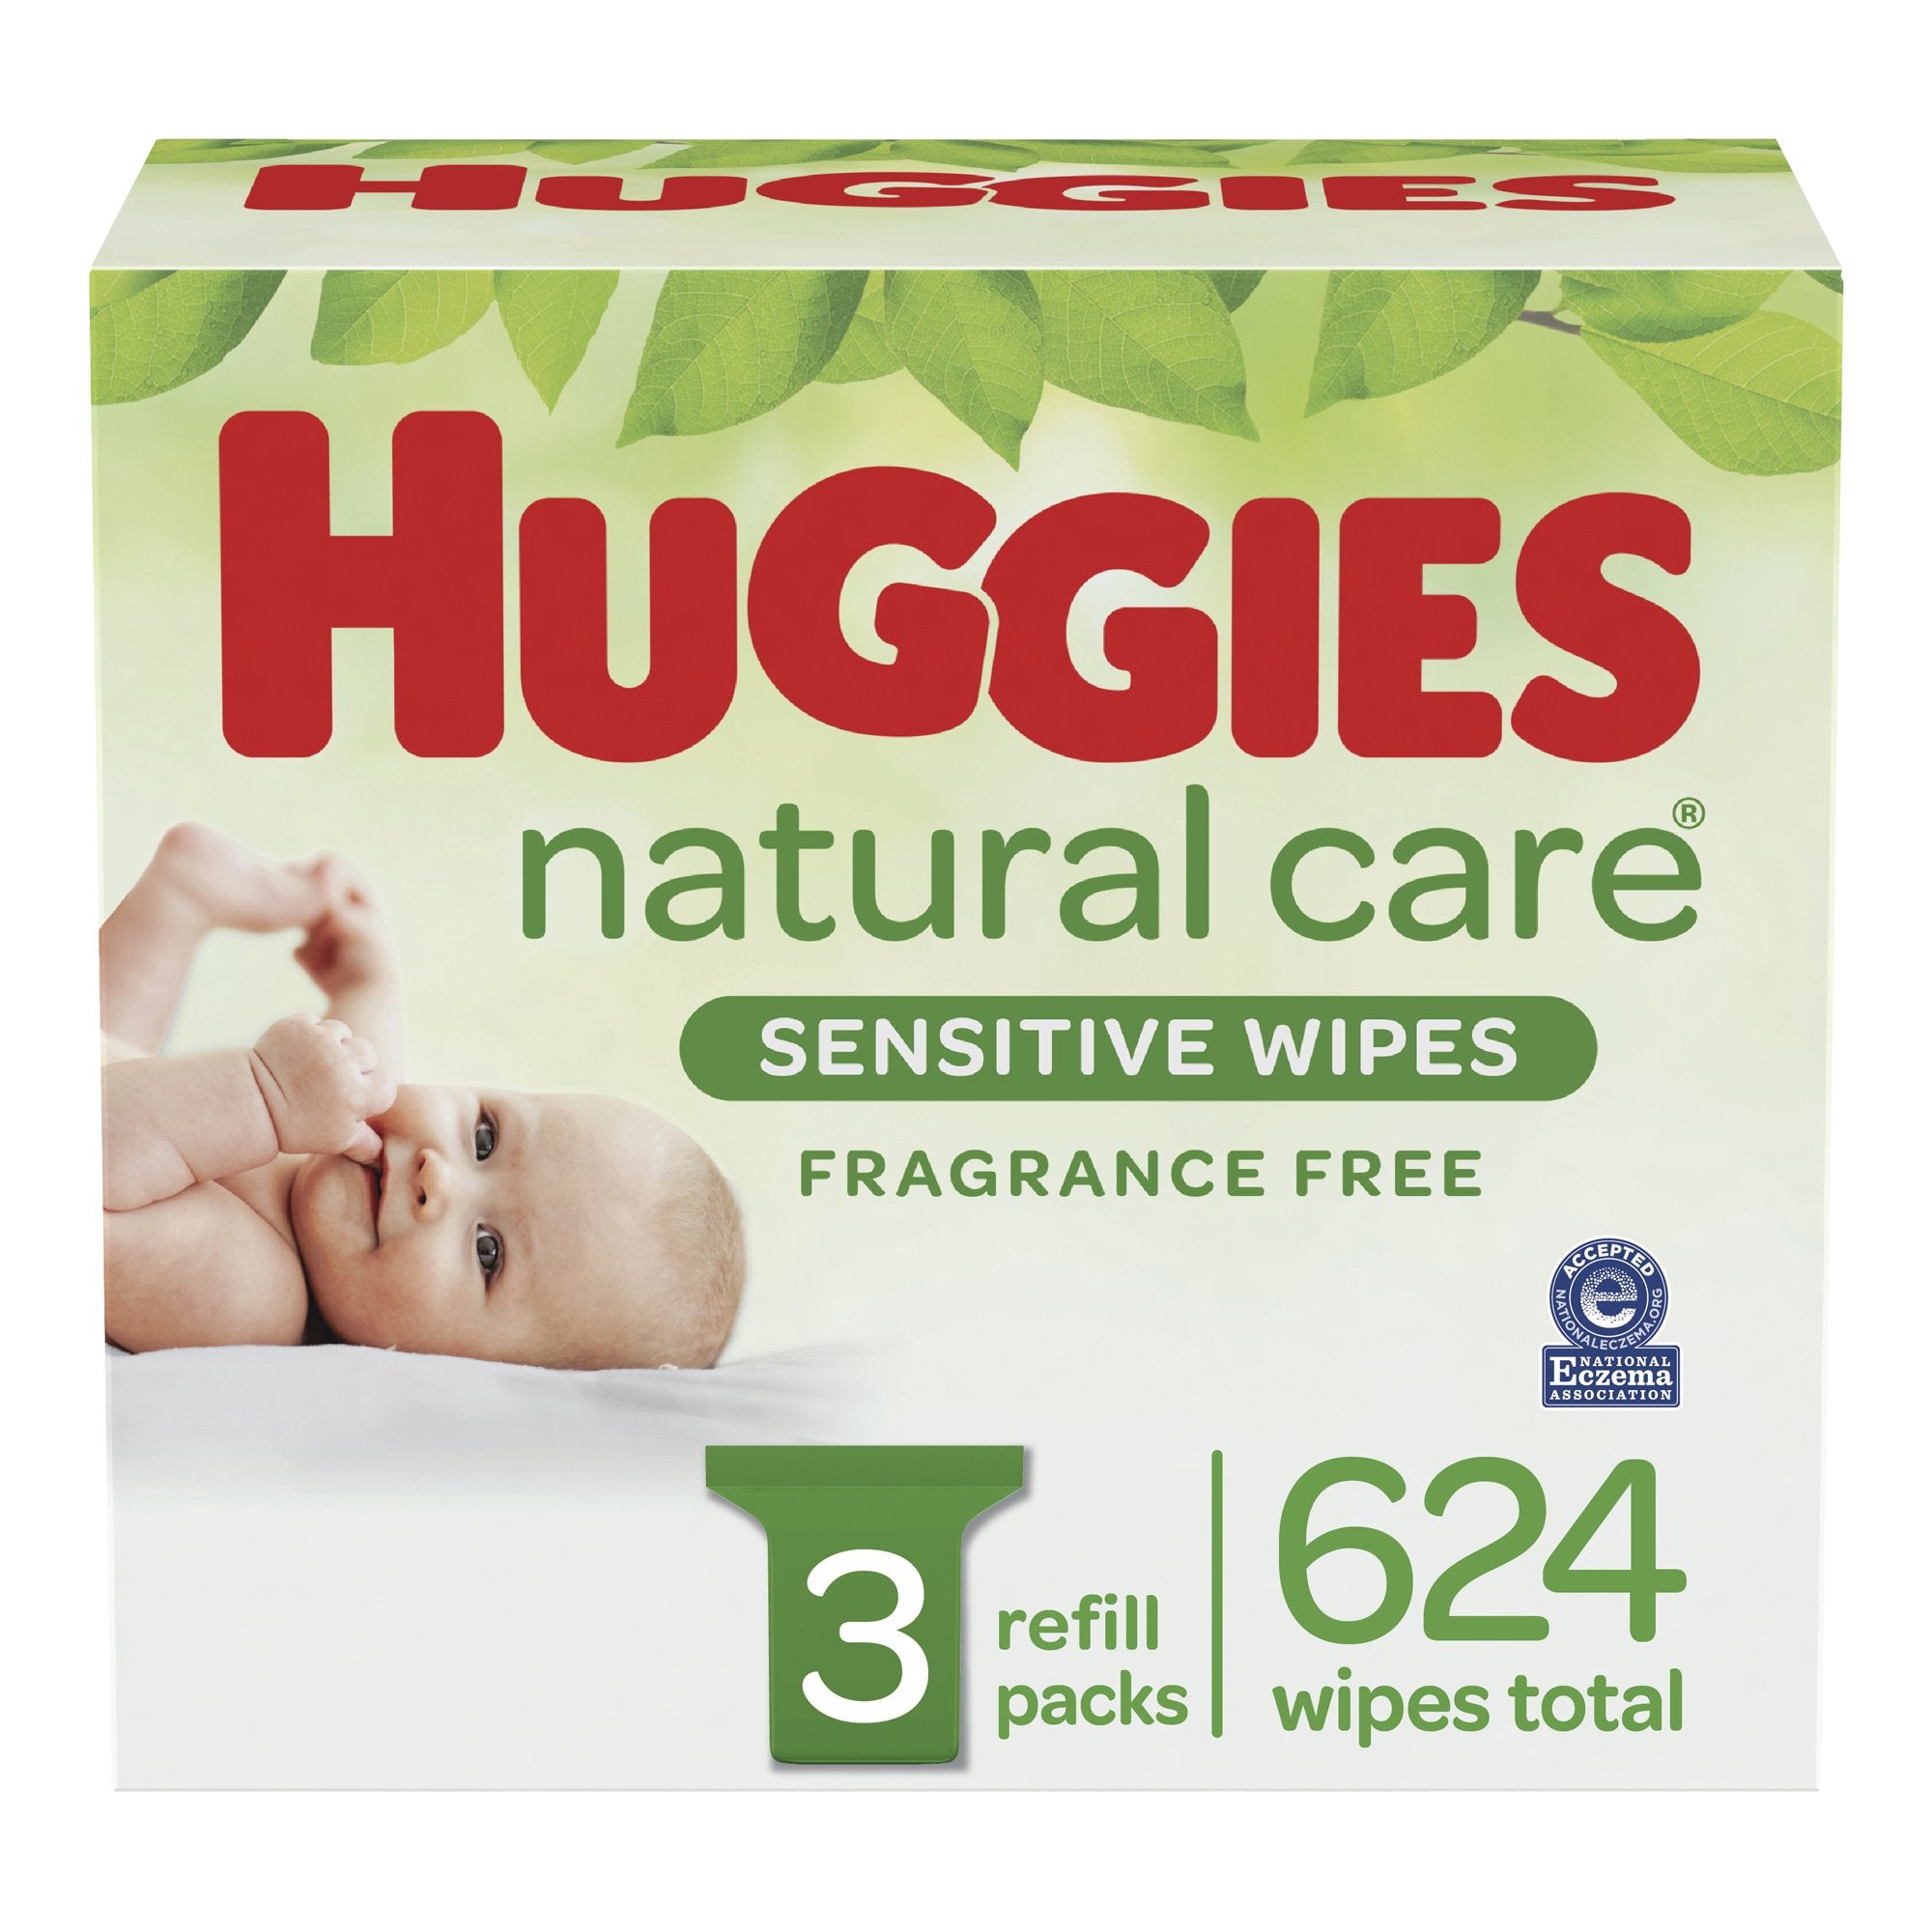 Baby Wipe Huggies® Natural Care® Soft Pack Unscented 624 Count